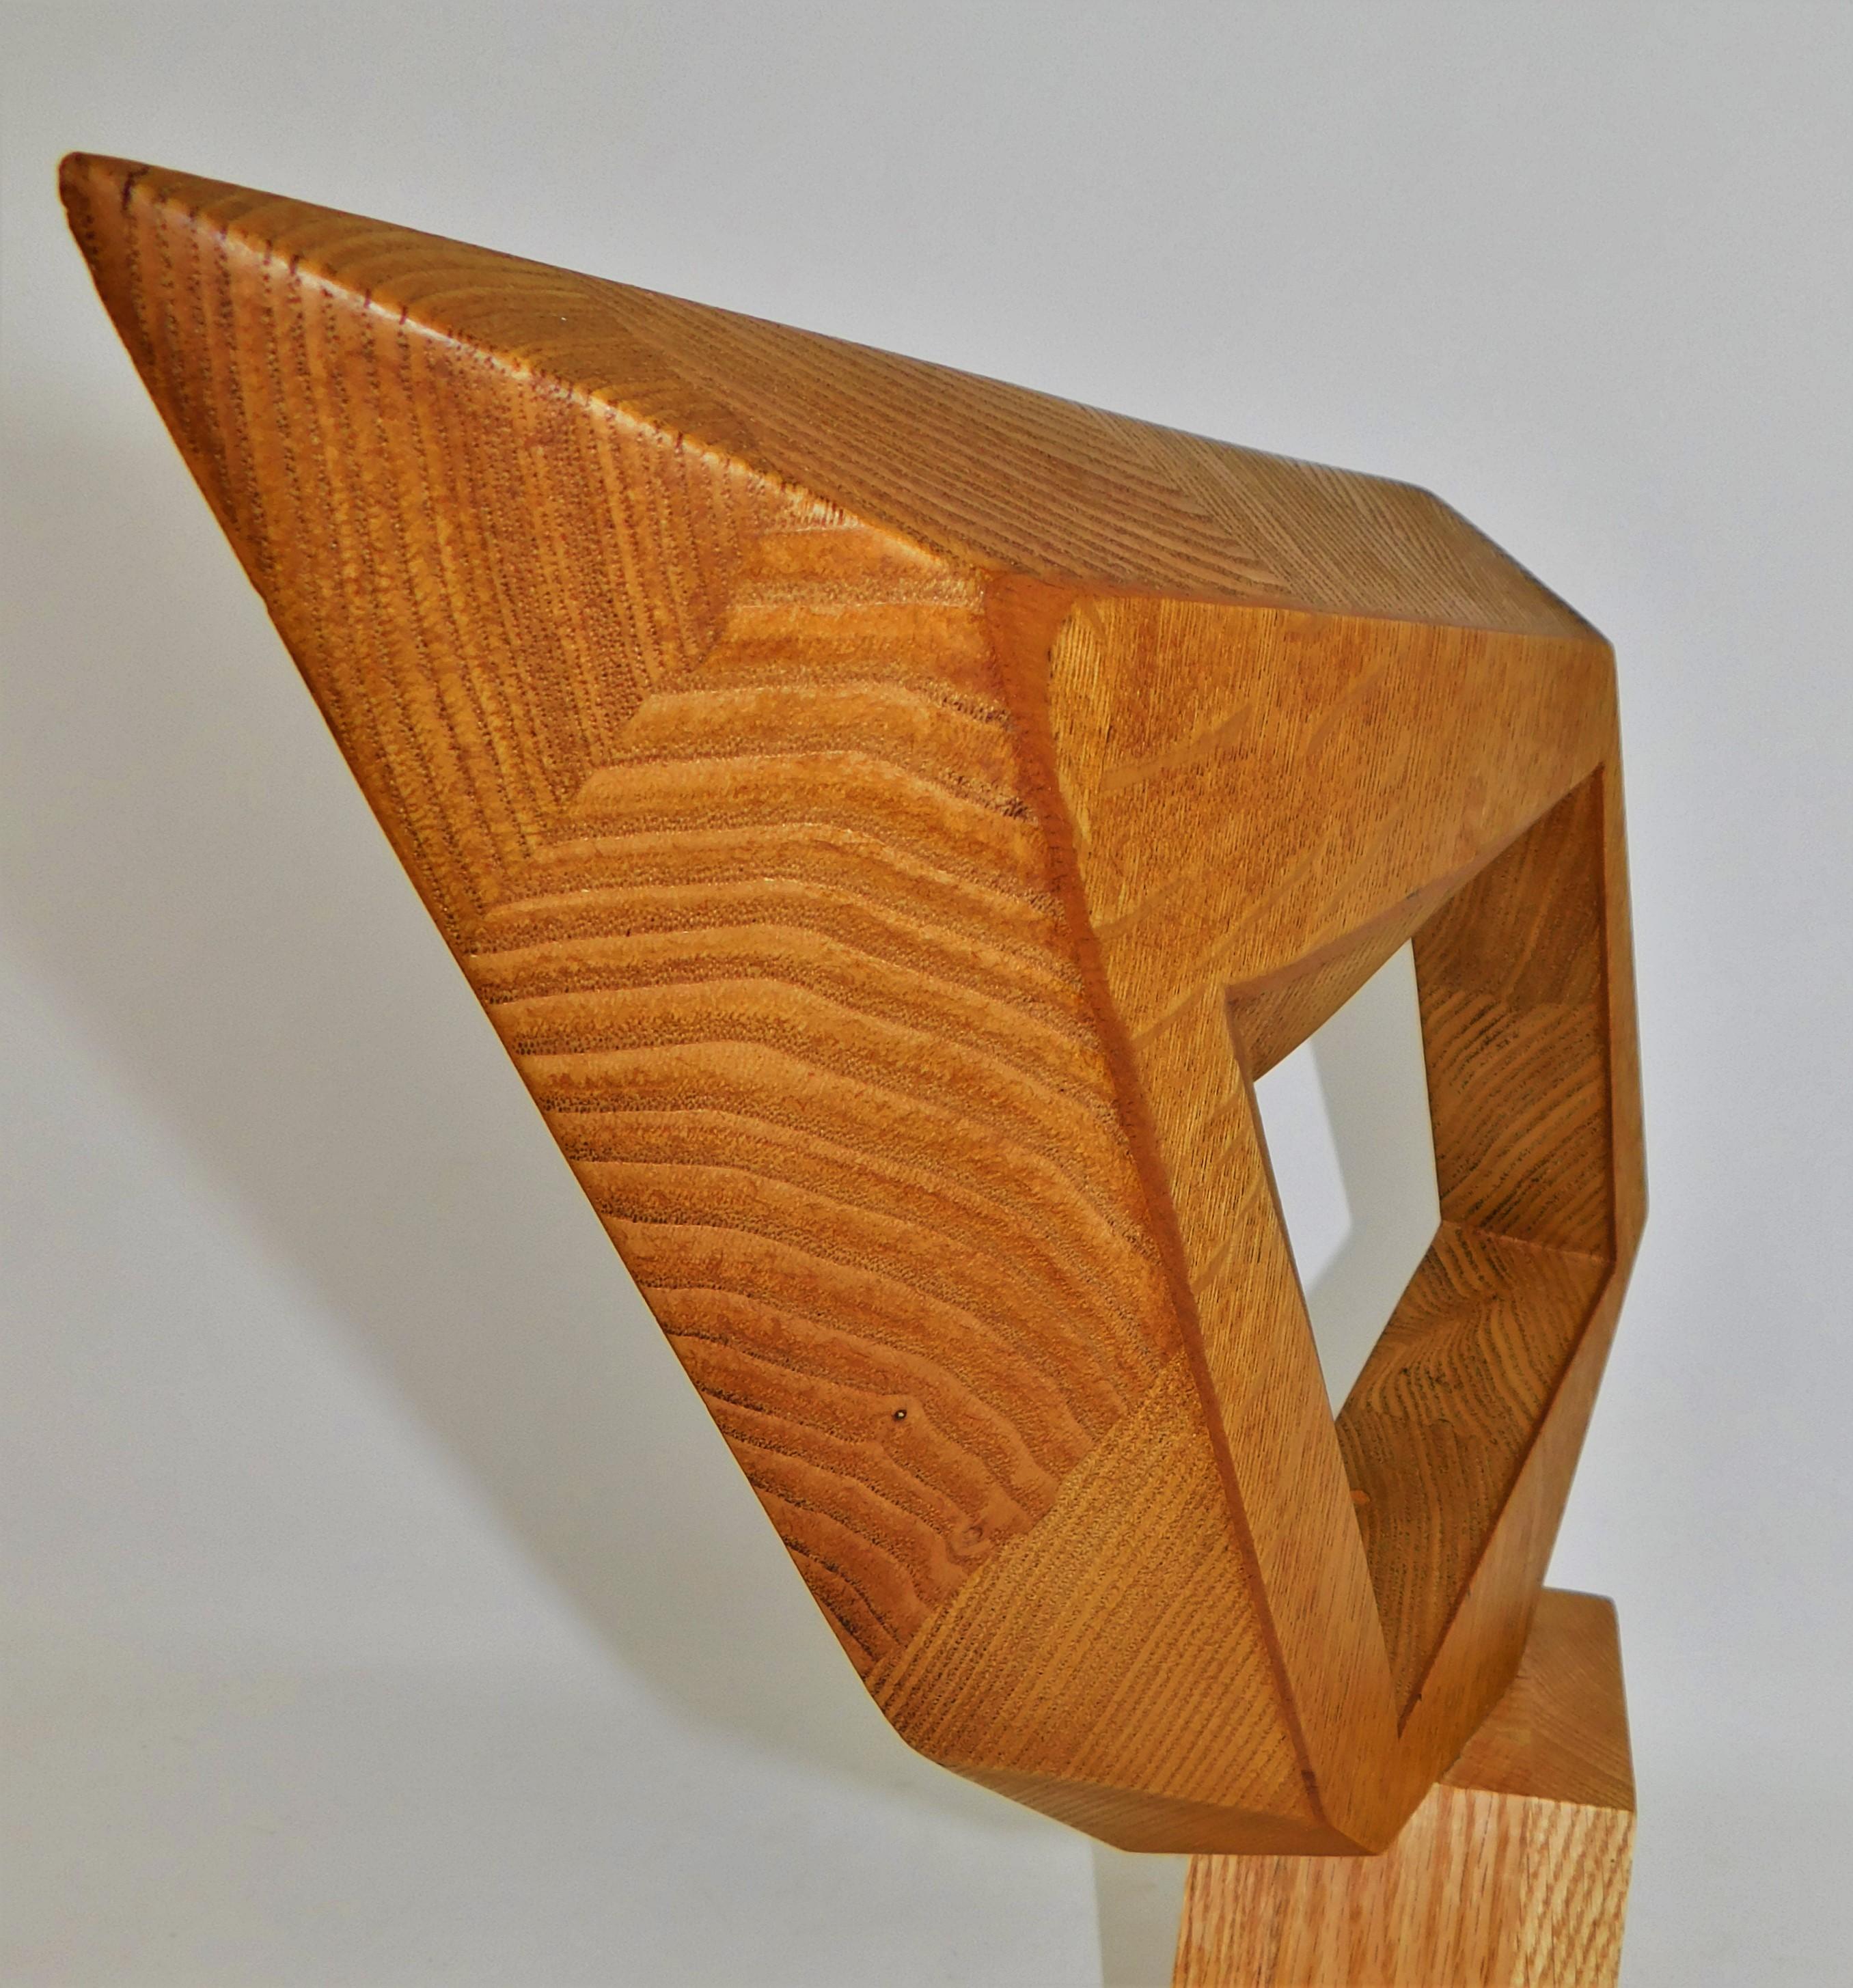 Hand-Crafted Signed Modern Abstract Constructivist Styled Wooden Oak Sculpture For Sale